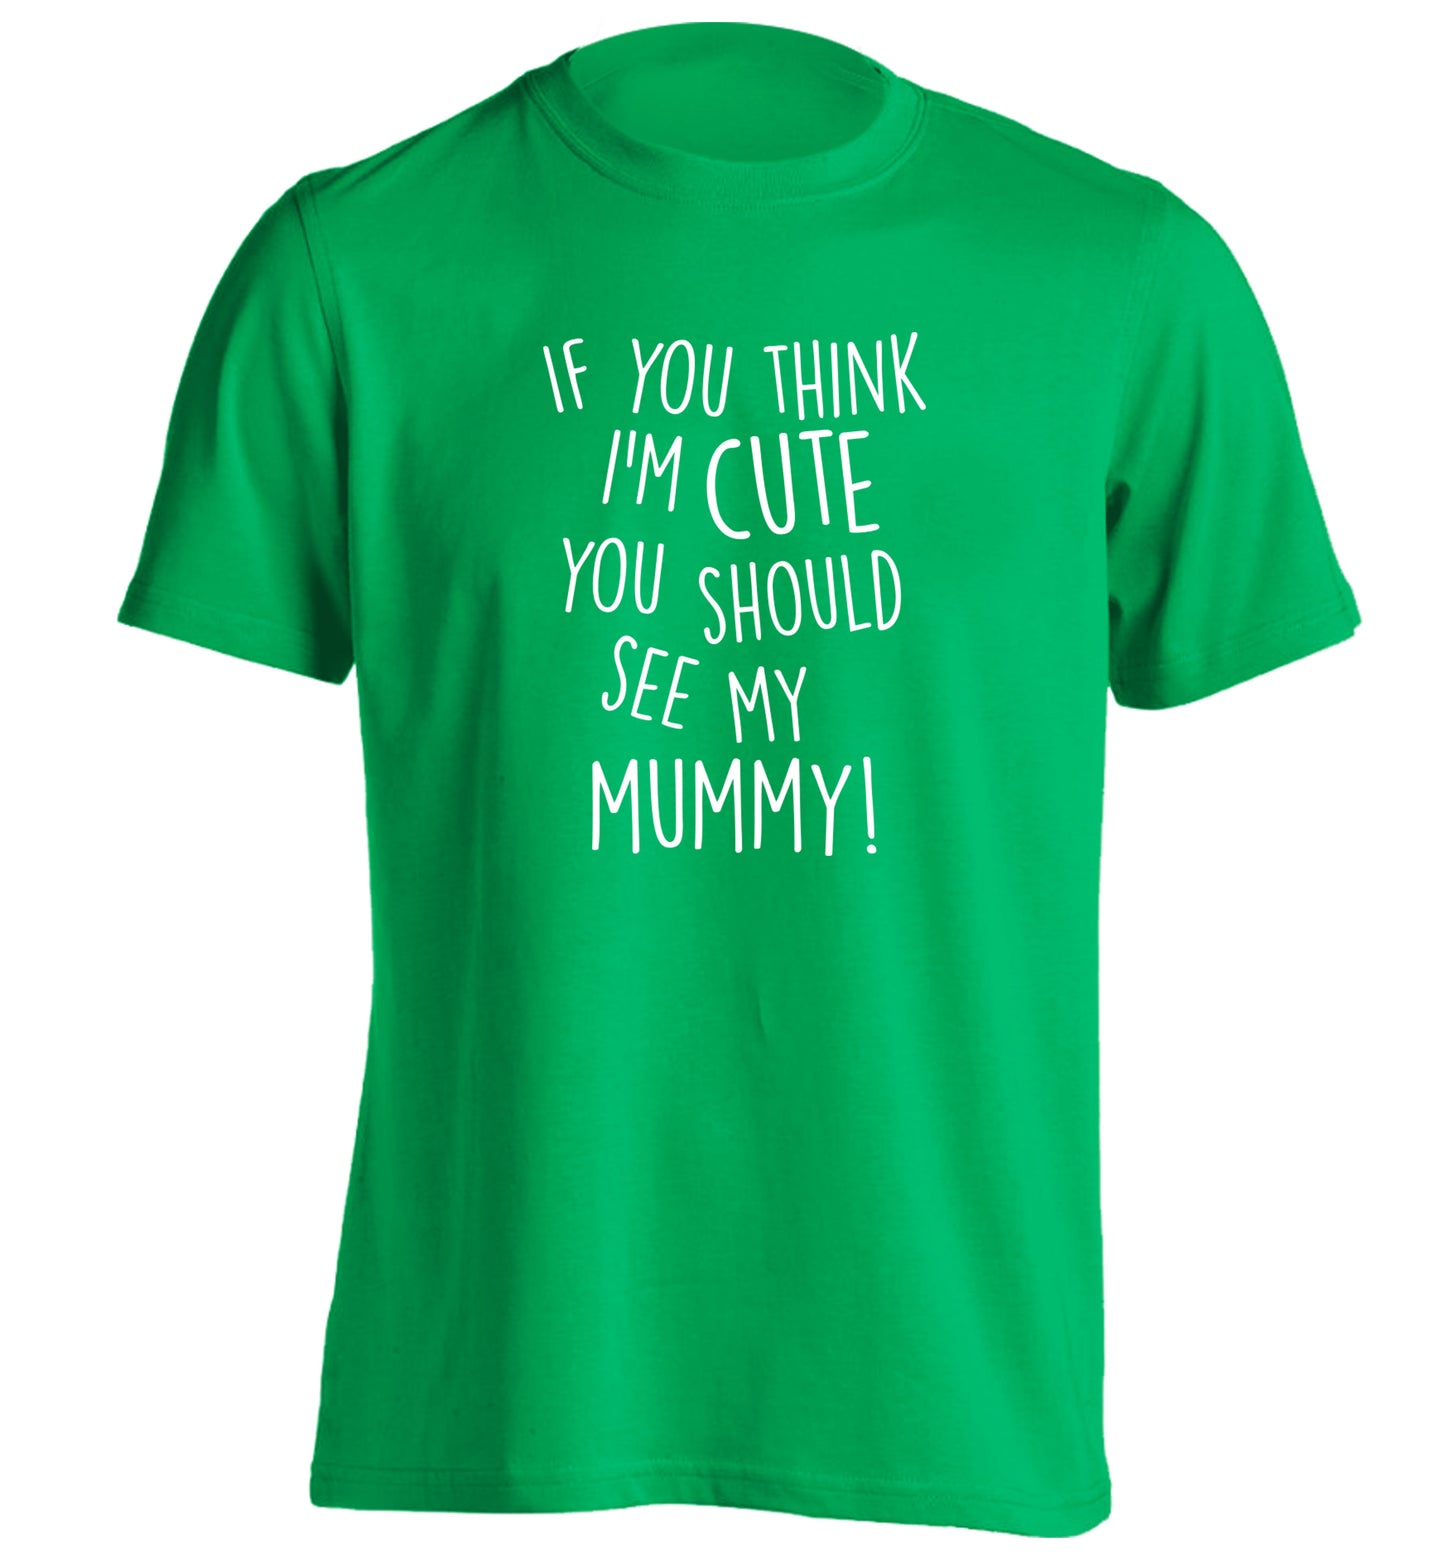 If you think I'm cute you should see my mummy adults unisex green Tshirt 2XL